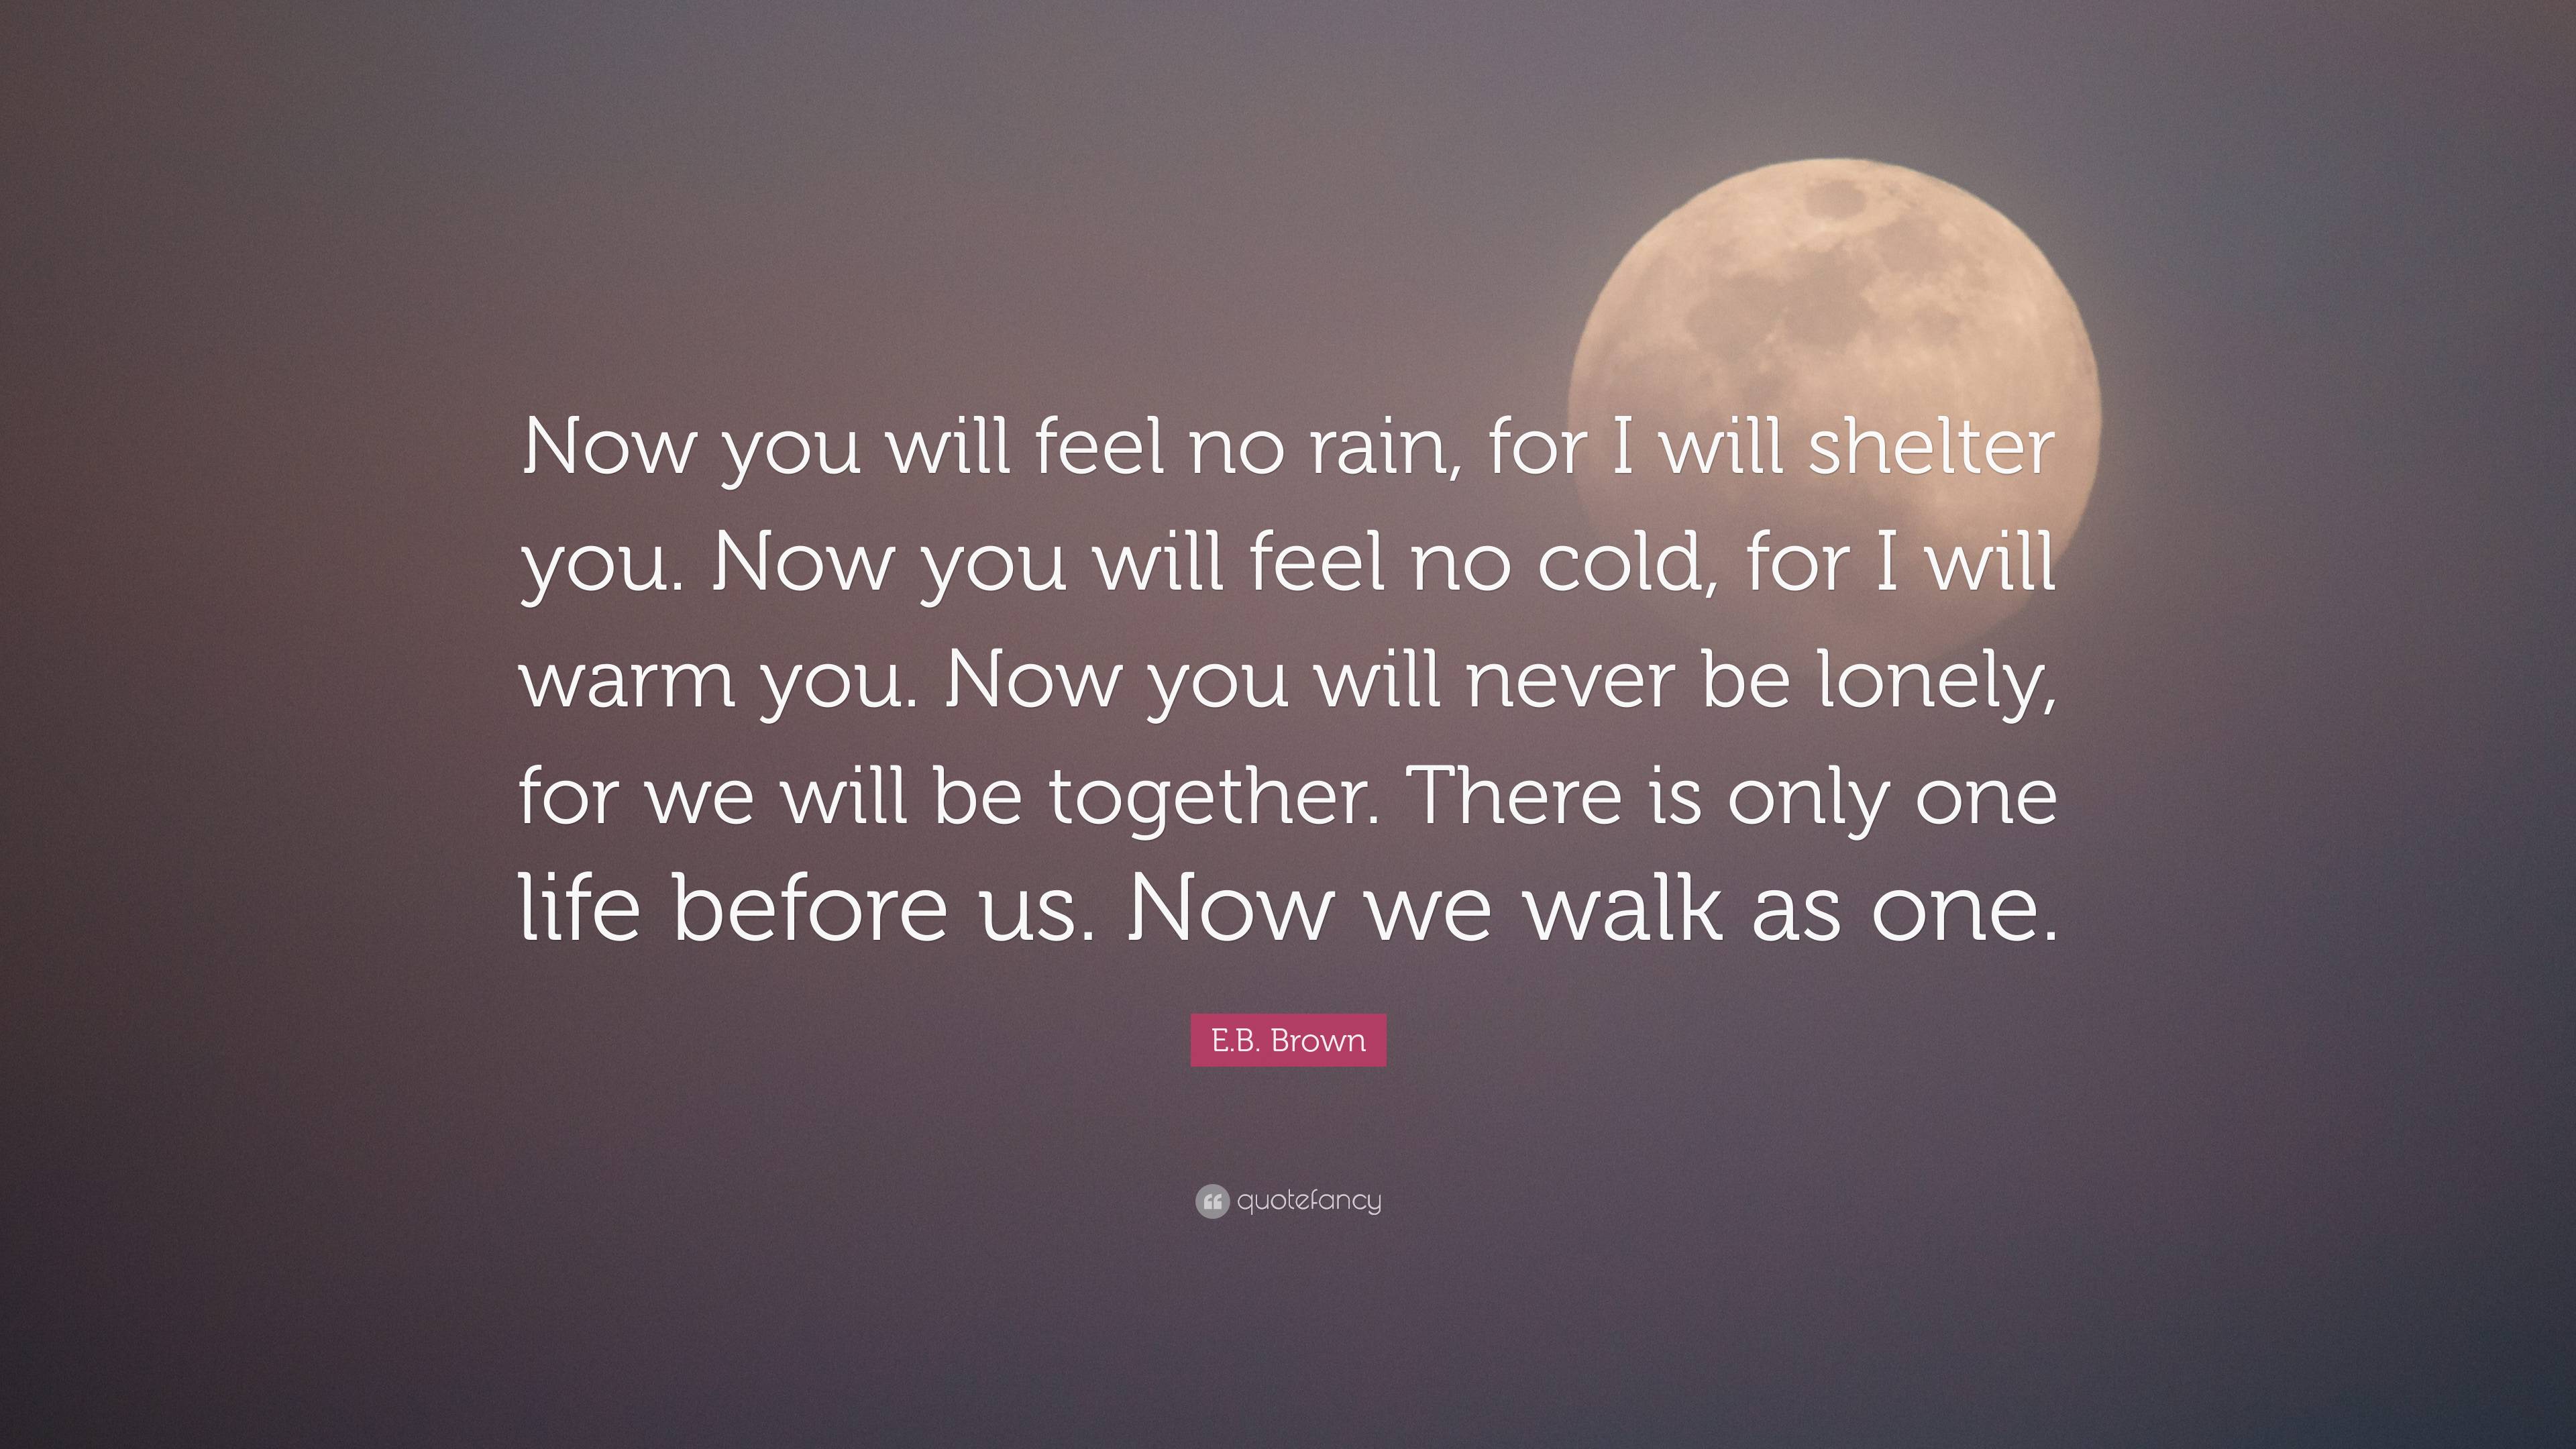 E.B. Brown Quote: “Now you will feel no rain, for I will shelter you ...